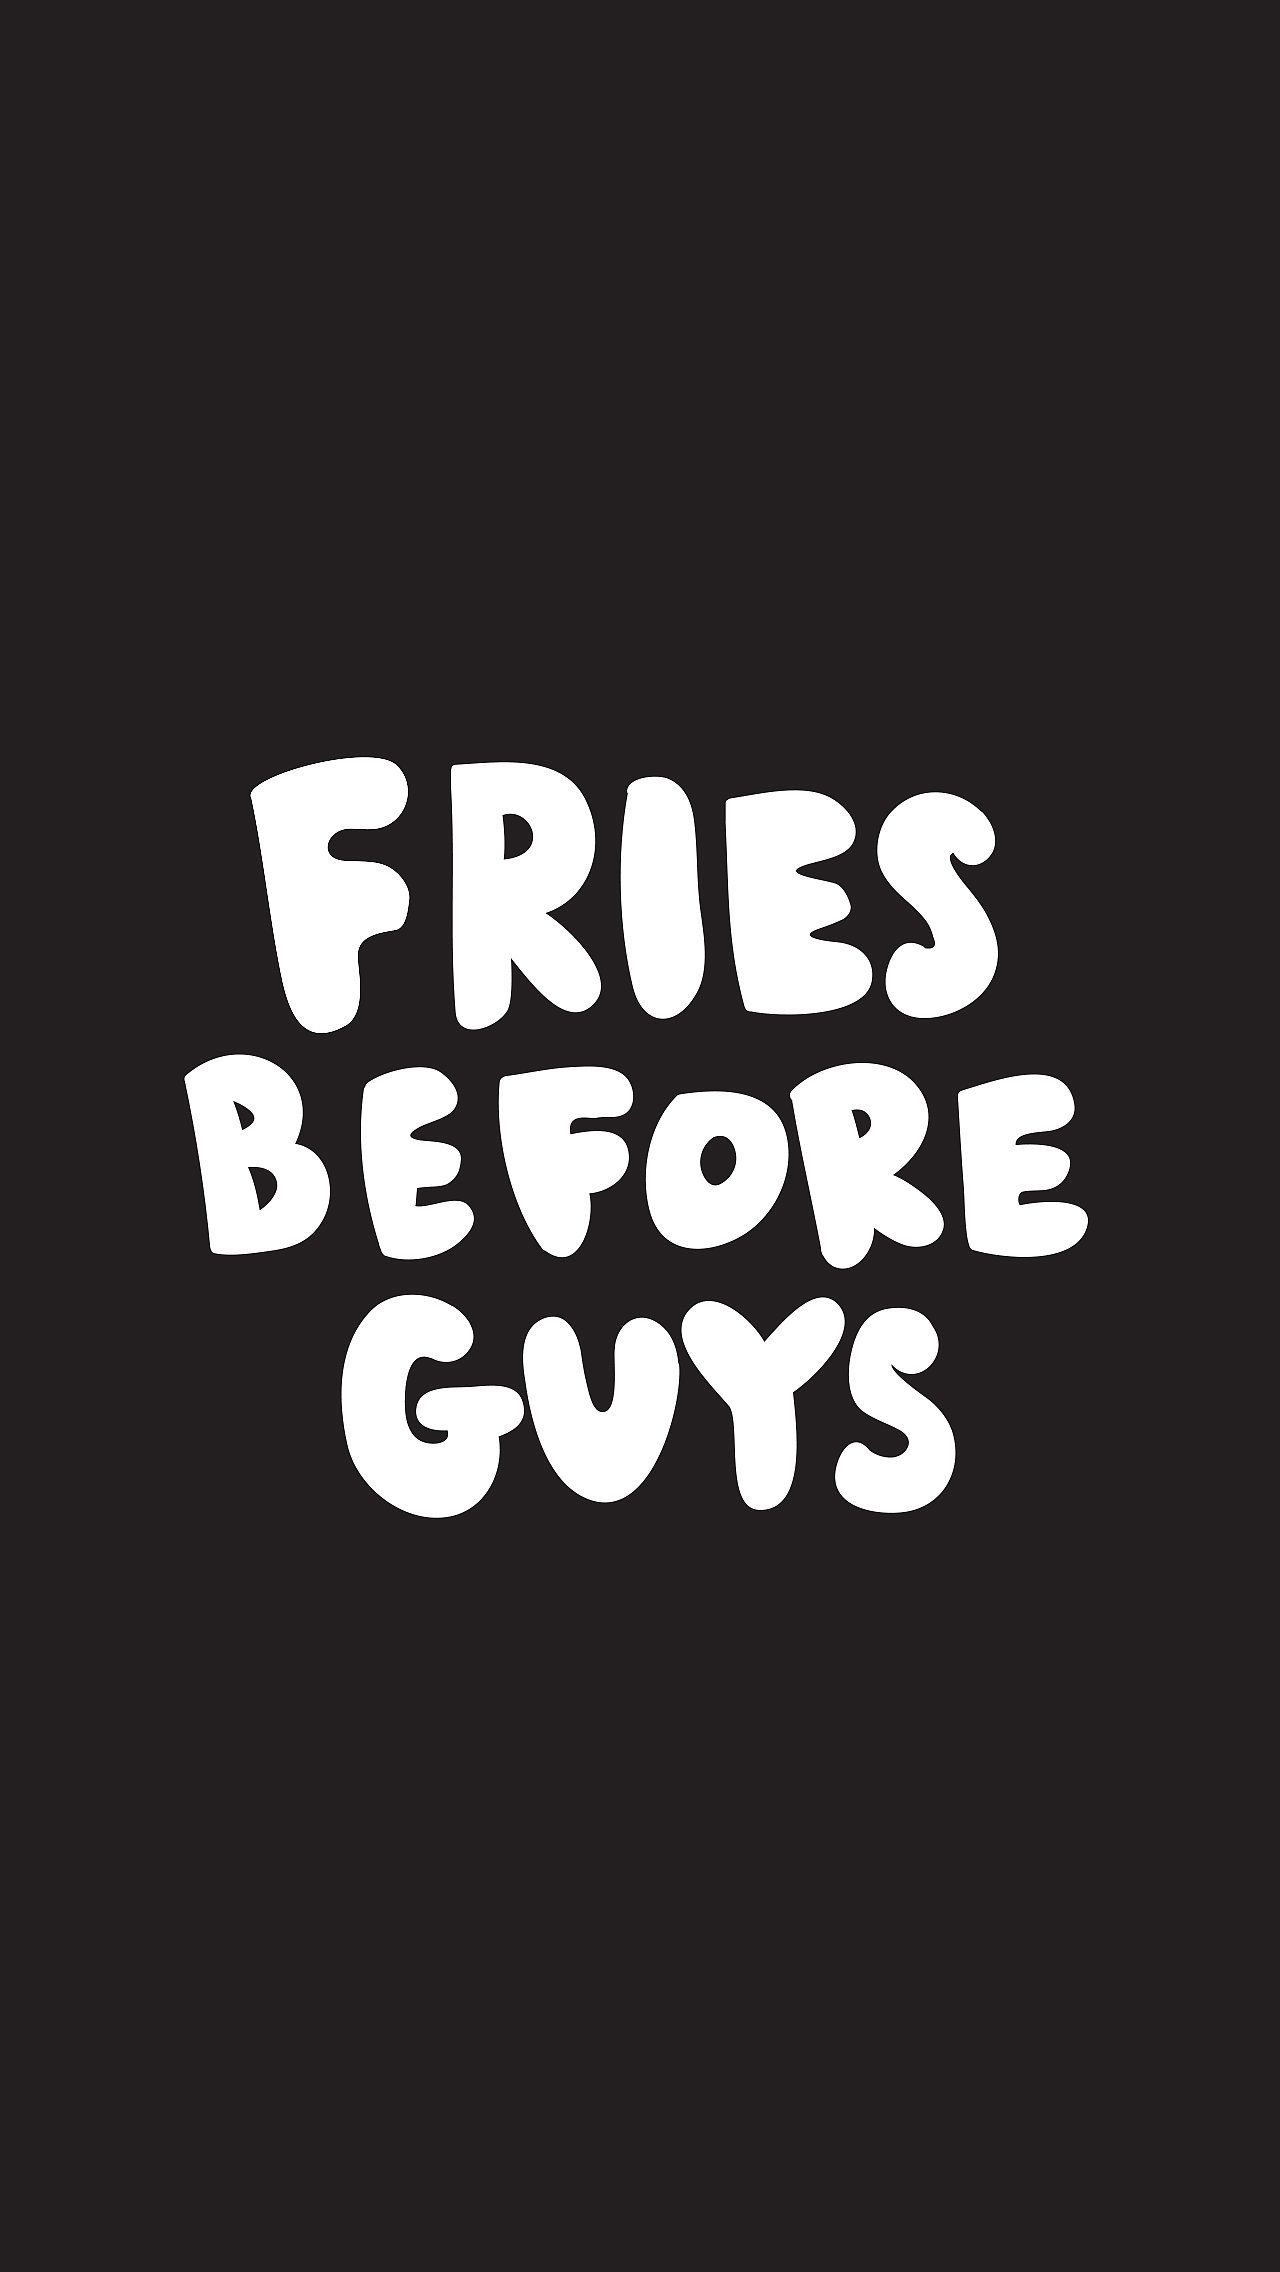 Fries Before Guys 35 Free and Fun iPhone Wallpapers to Liven Up